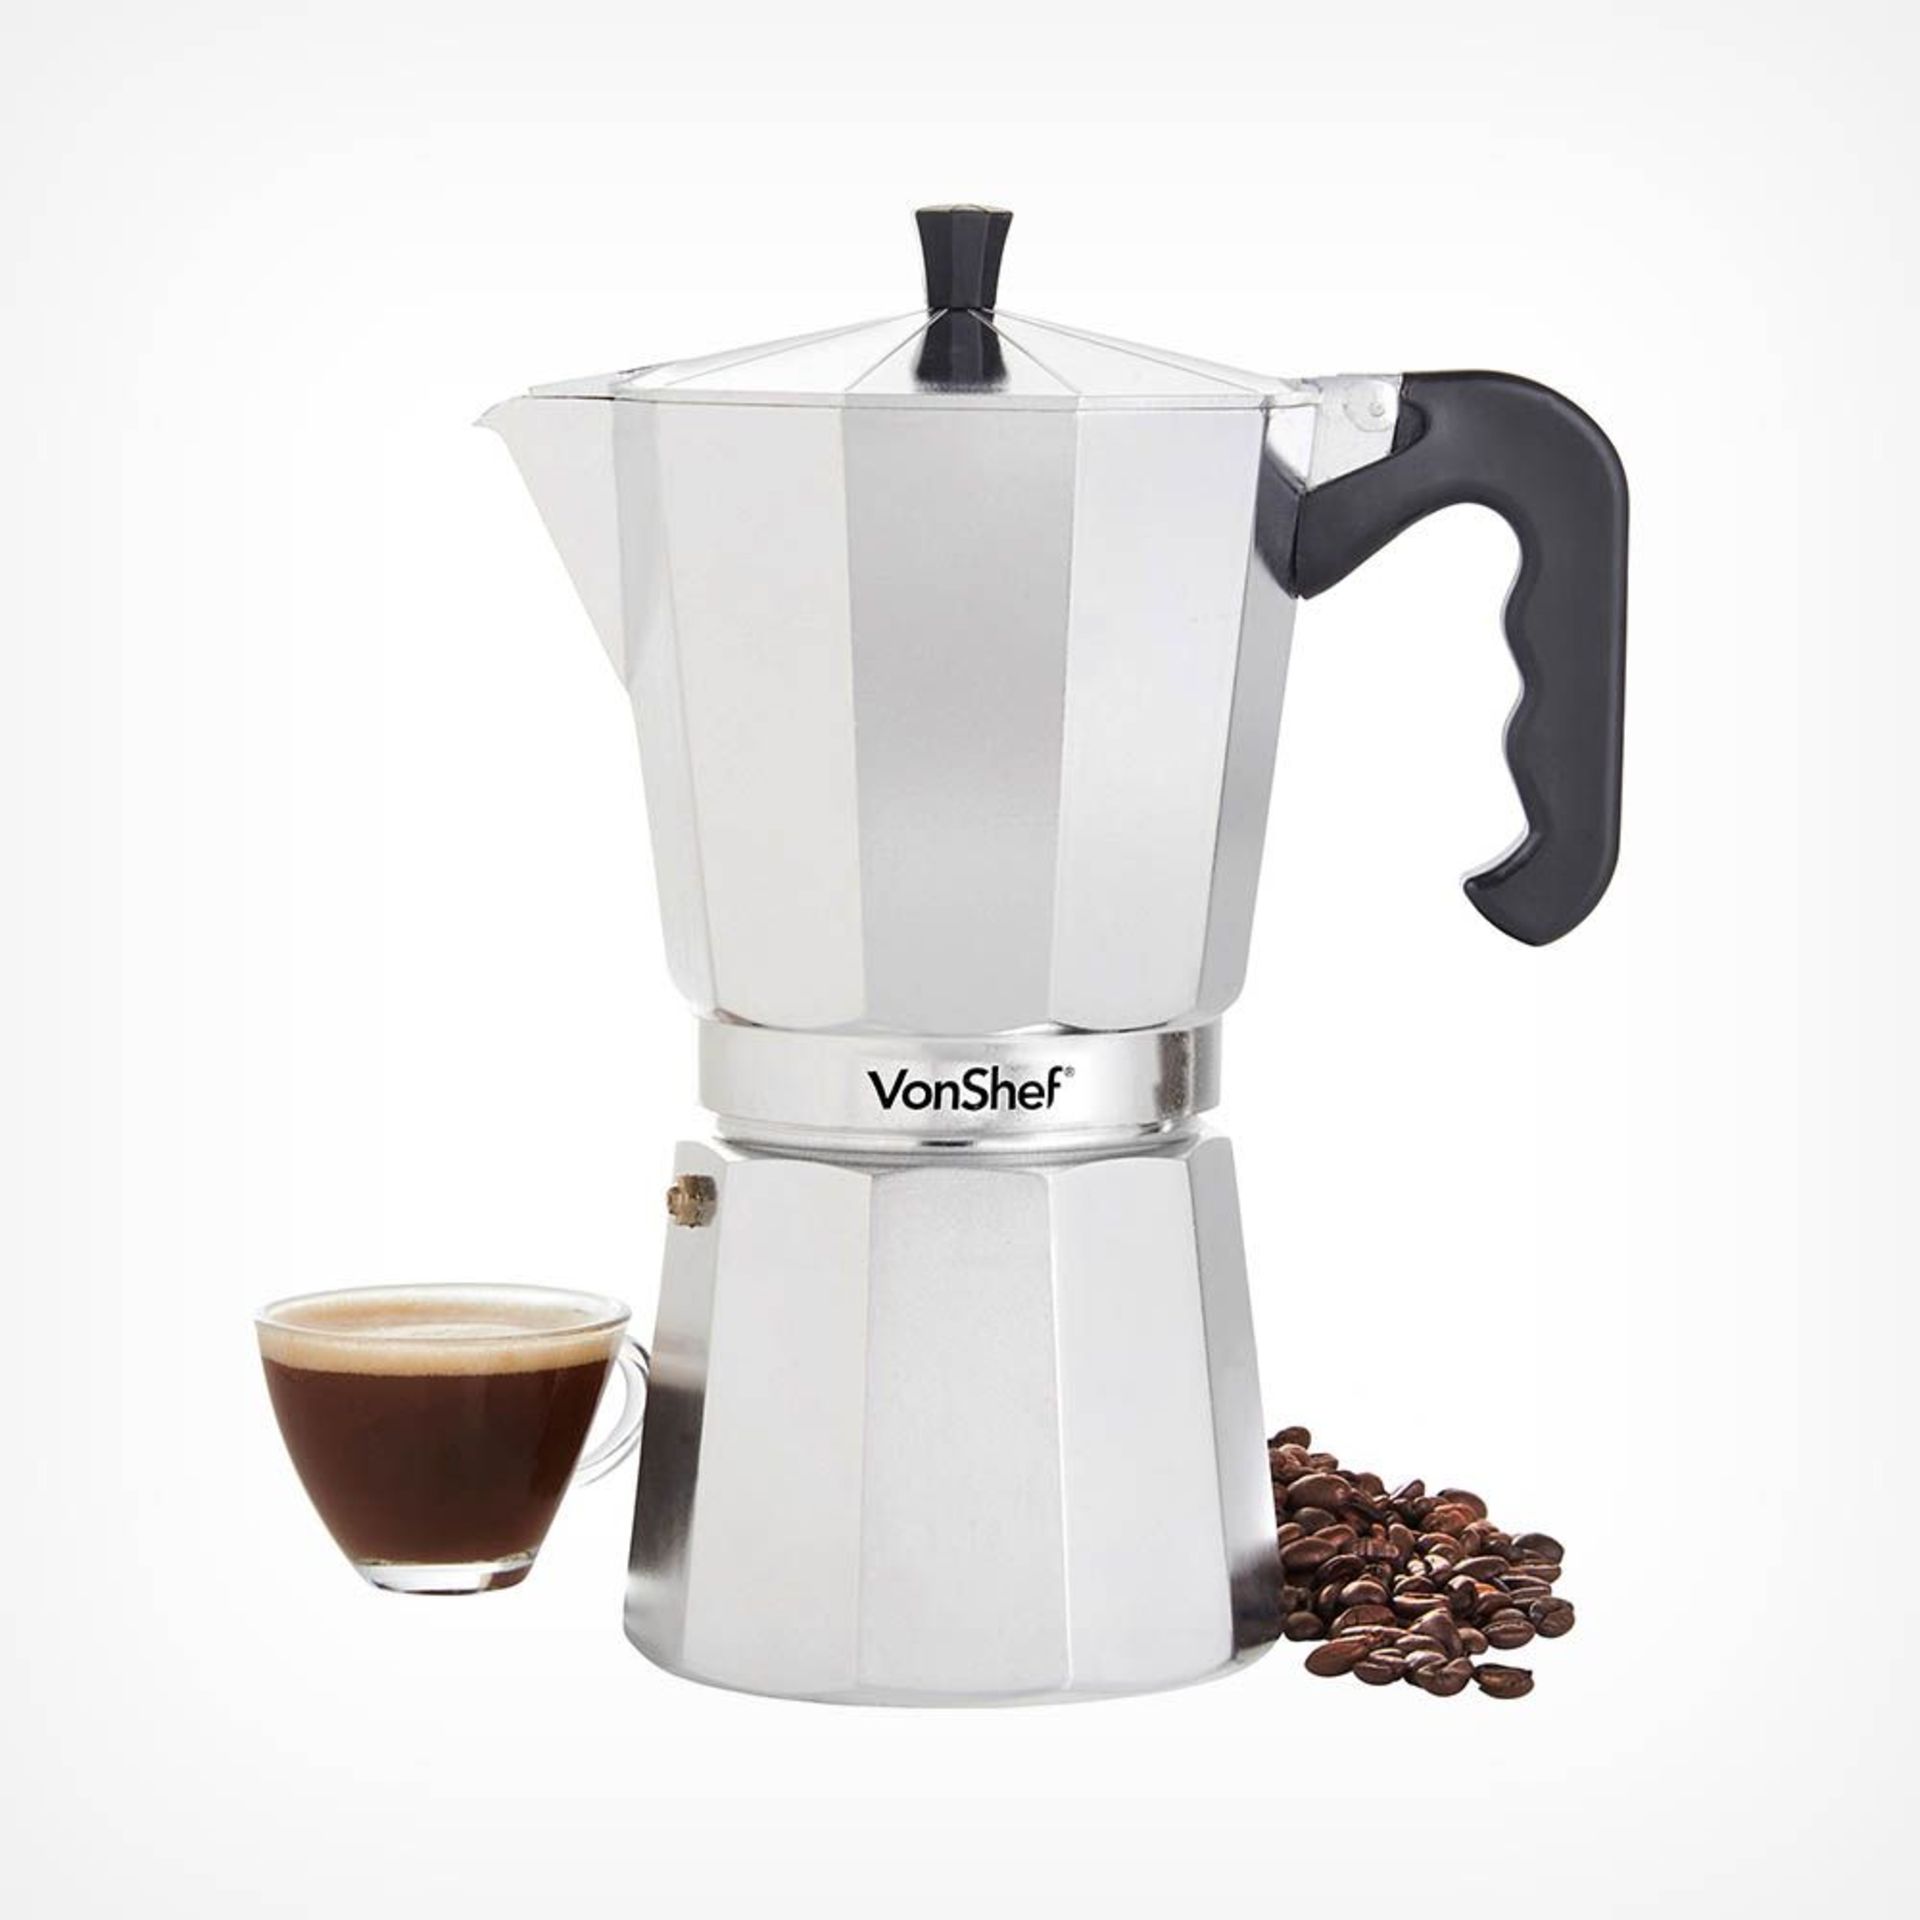 (22/233)12 Cup Espresso Maker. - BI. The ideal size for serving up 12 cups of espresso, this time-